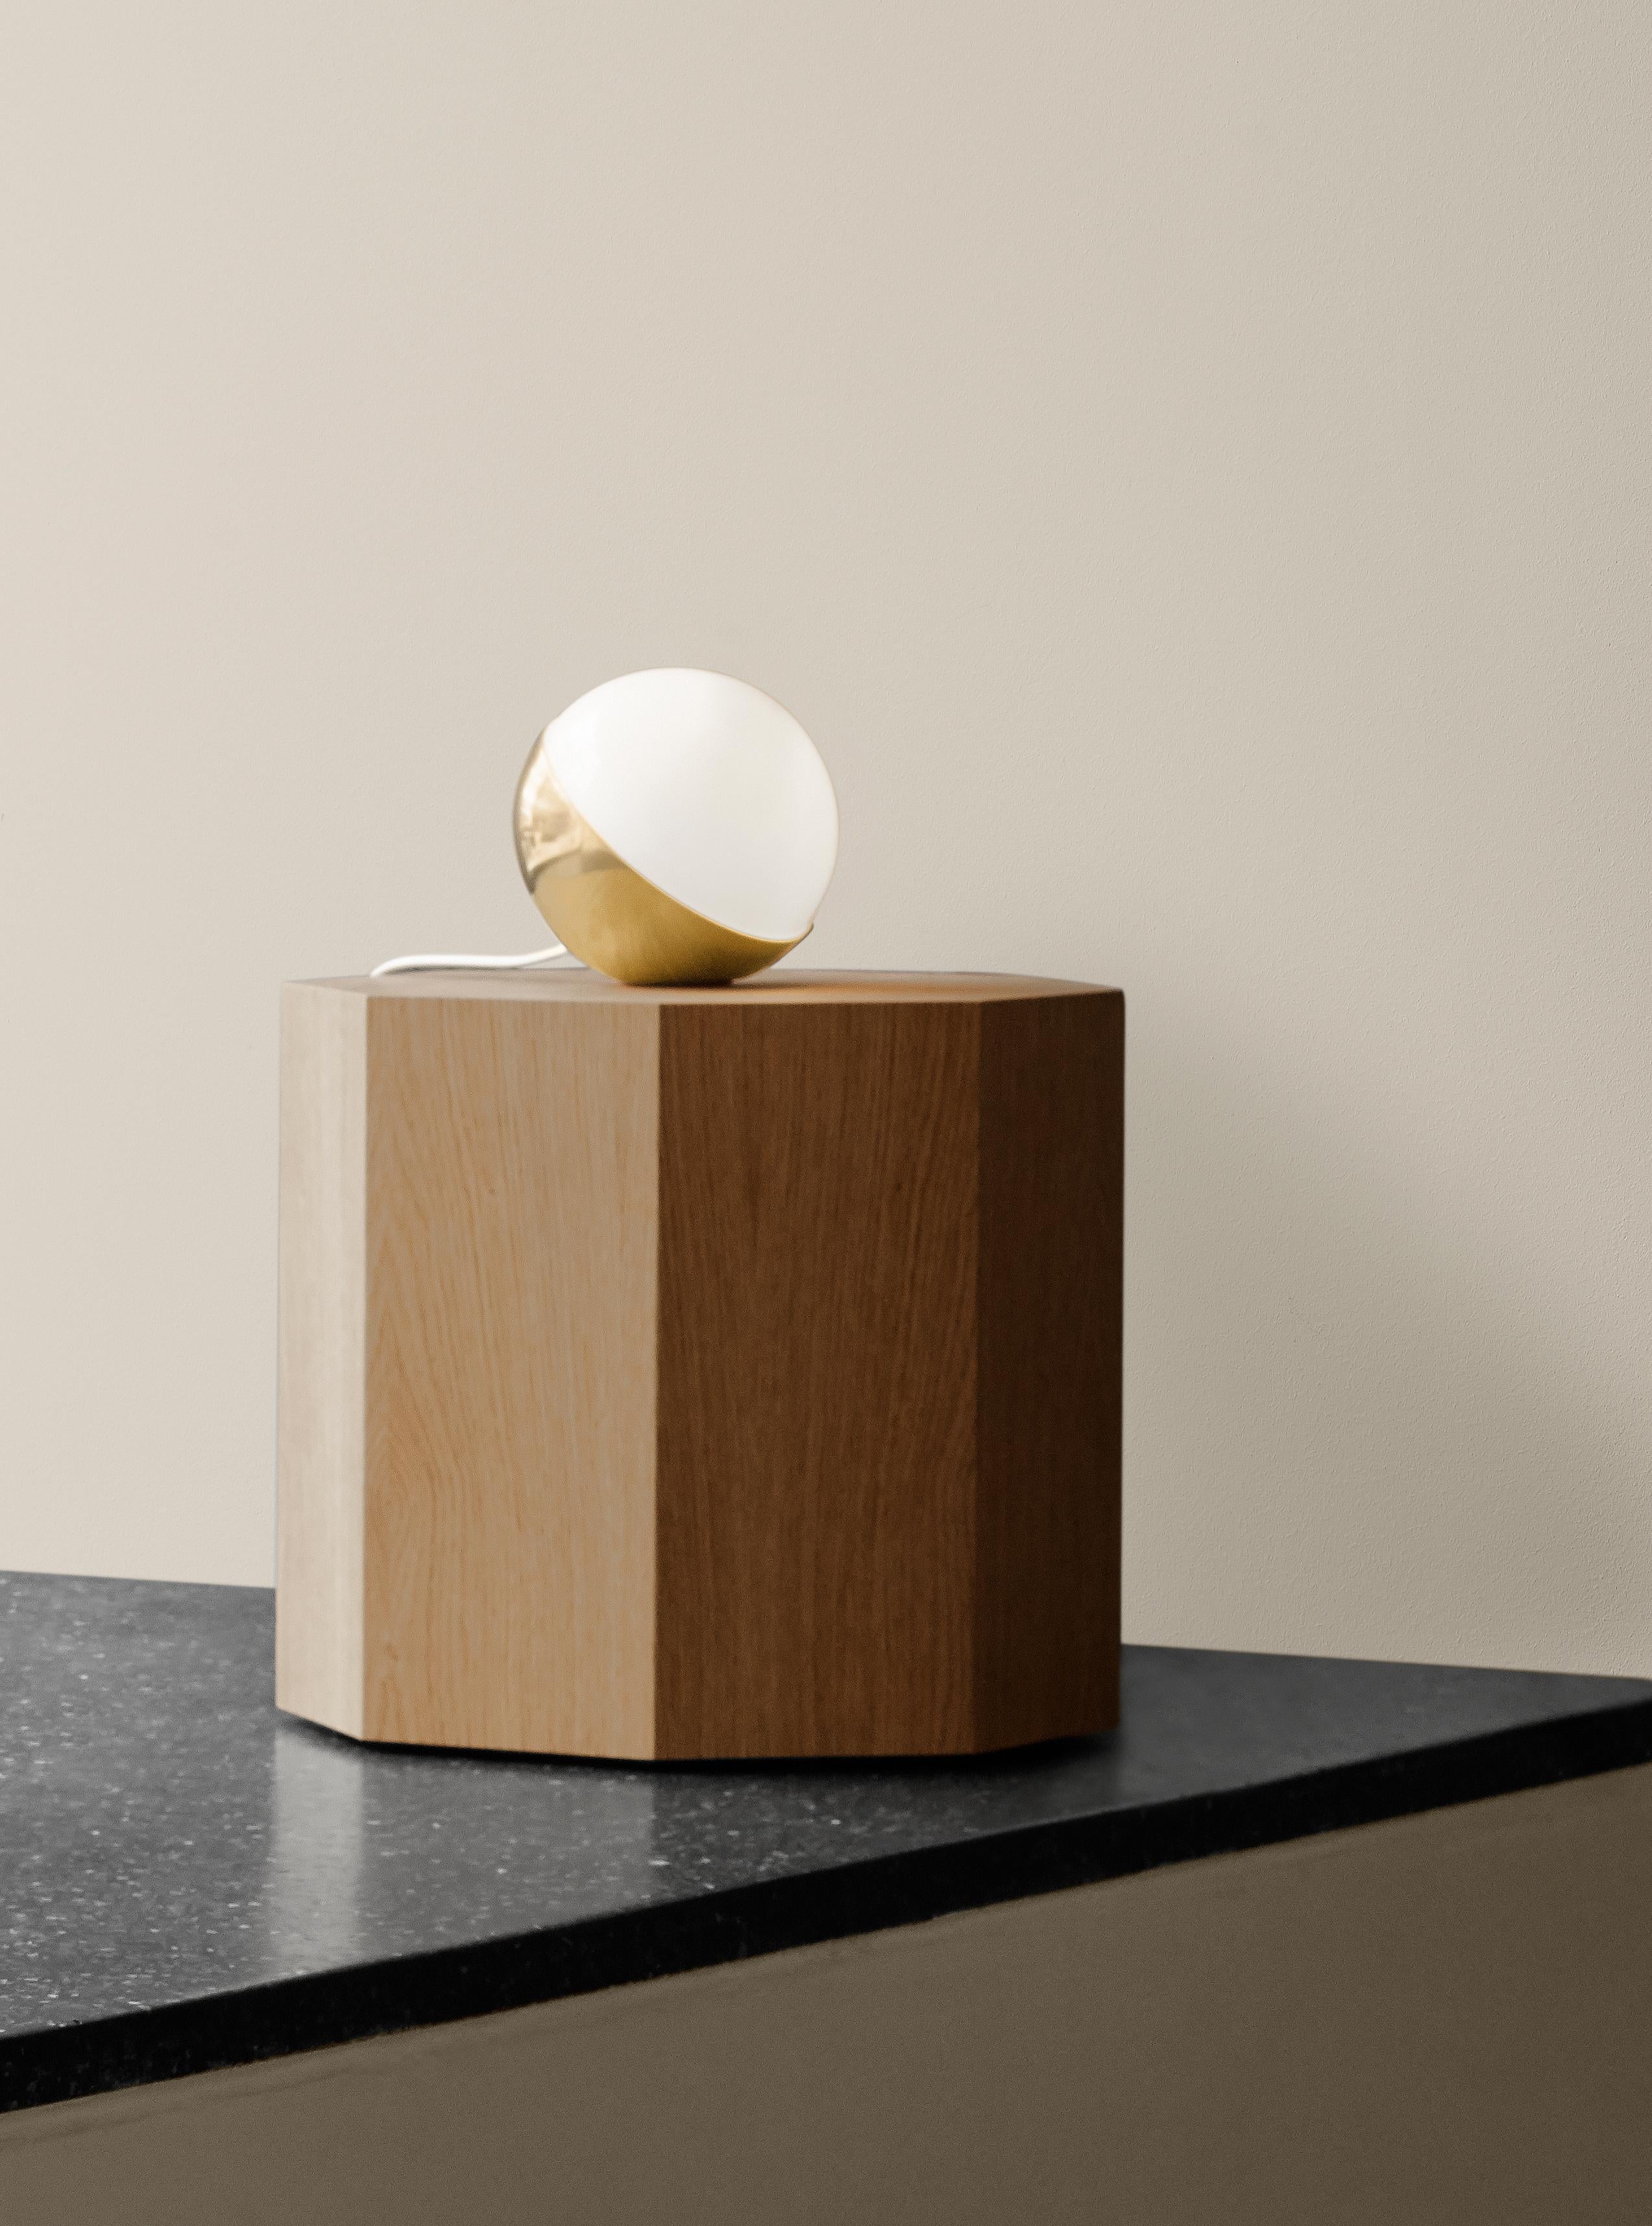 Small Vilhelm Lauritzen 'VL Studio' brass and glass table lamp for Louis Poulsen.

This innovative table lamp is based on Lauritzen's original studio wall lamp for Radiohuset, which indicated with a red or green light whether the studio was